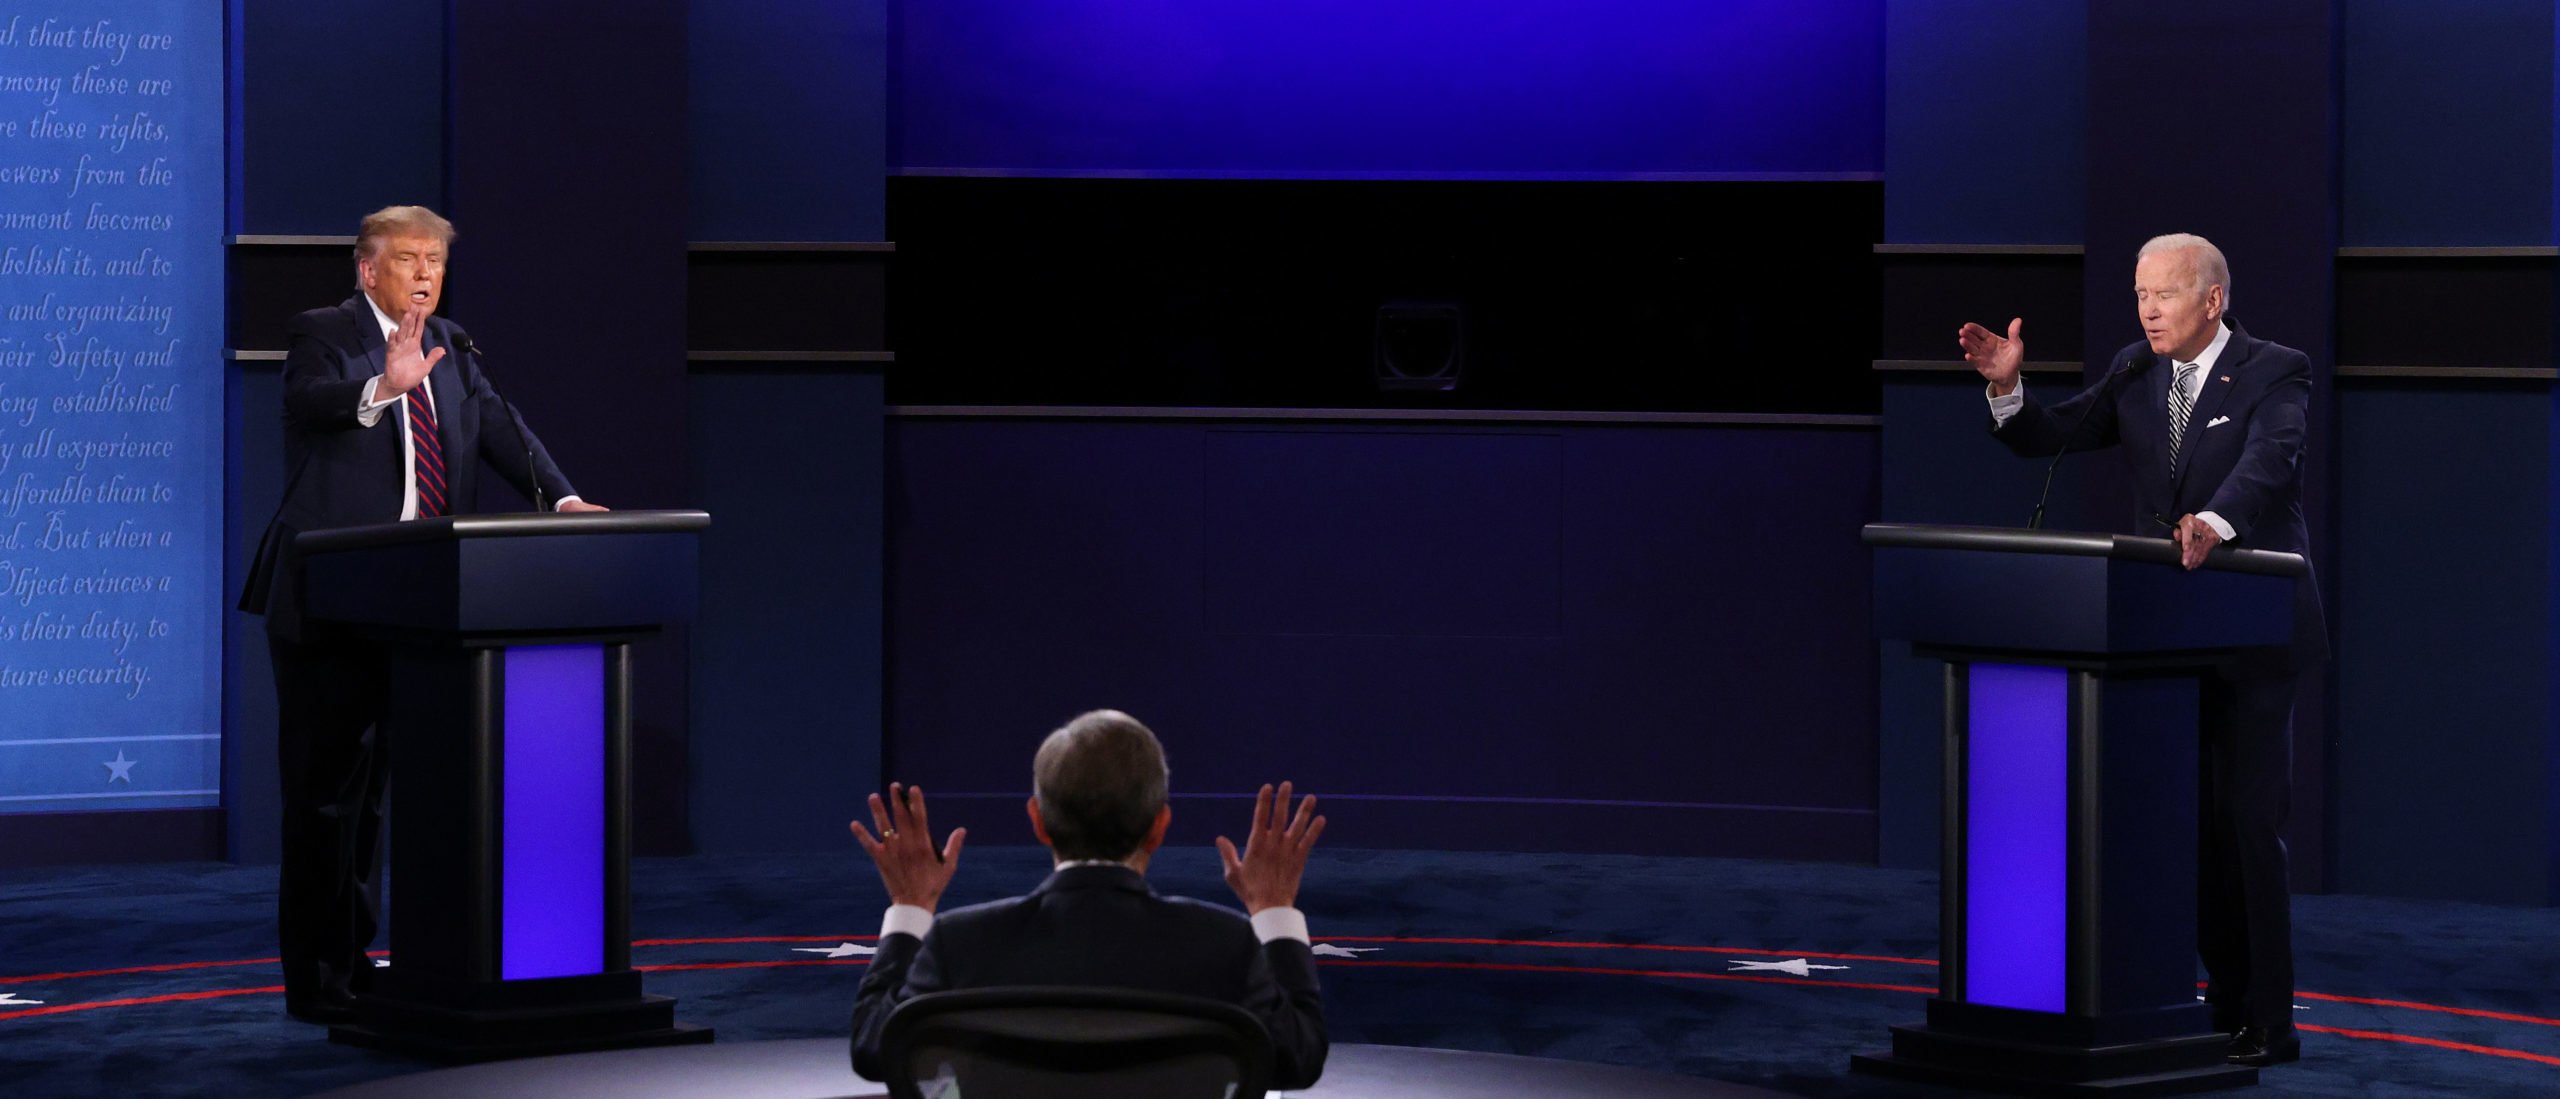 CLEVELAND, OHIO - SEPTEMBER 29: U.S. President Donald Trump and Democratic presidential nominee Joe Biden participate in the first presidential debate moderated by Fox News anchor Chris Wallace (C) at the Health Education Campus of Case Western Reserve University on September 29, 2020 in Cleveland, Ohio. This is the first of three planned debates between the two candidates in the lead up to the election on November 3. (Photo by Scott Olson/Getty Images)